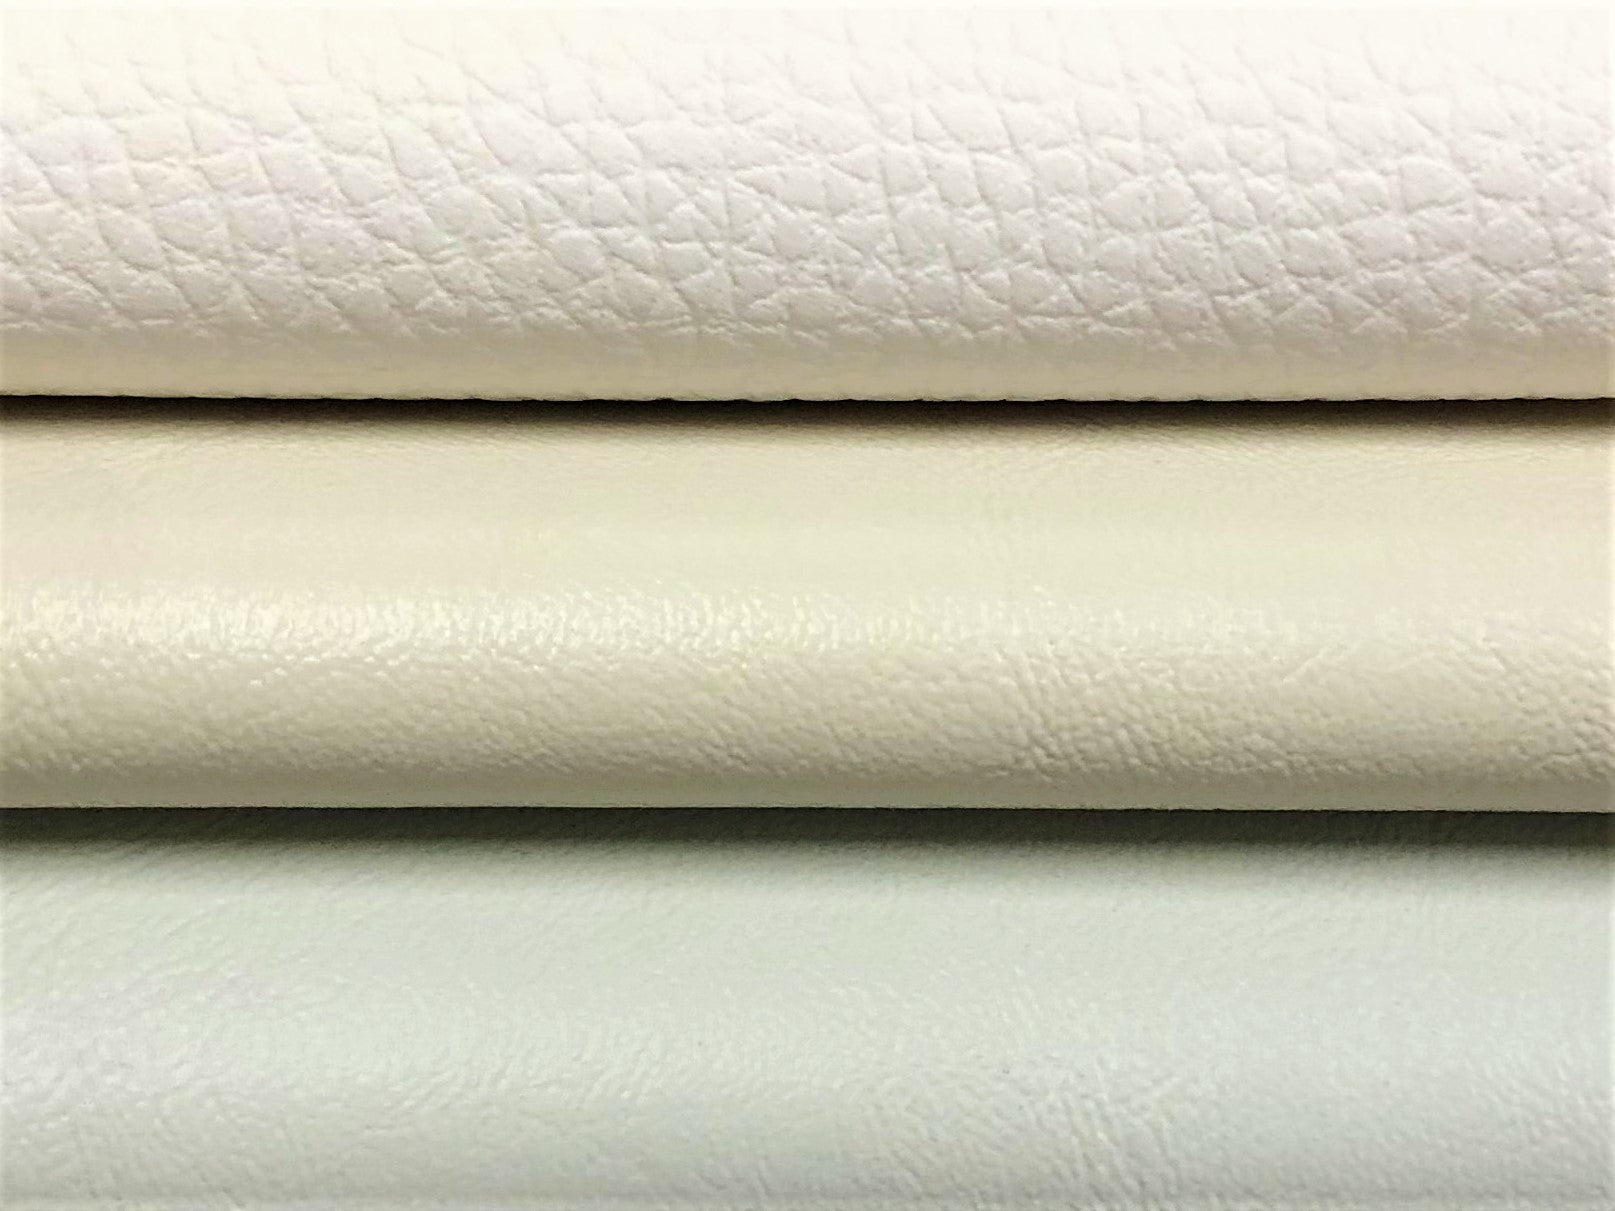 White Matte Faux Vegan Leather by The Yard Synthetic Pleather 0.9 mm  Fullgrain Look Calf Smooth Nappa 4 Yards 52 inch Wide x 144 inch Long Soft  Smooth